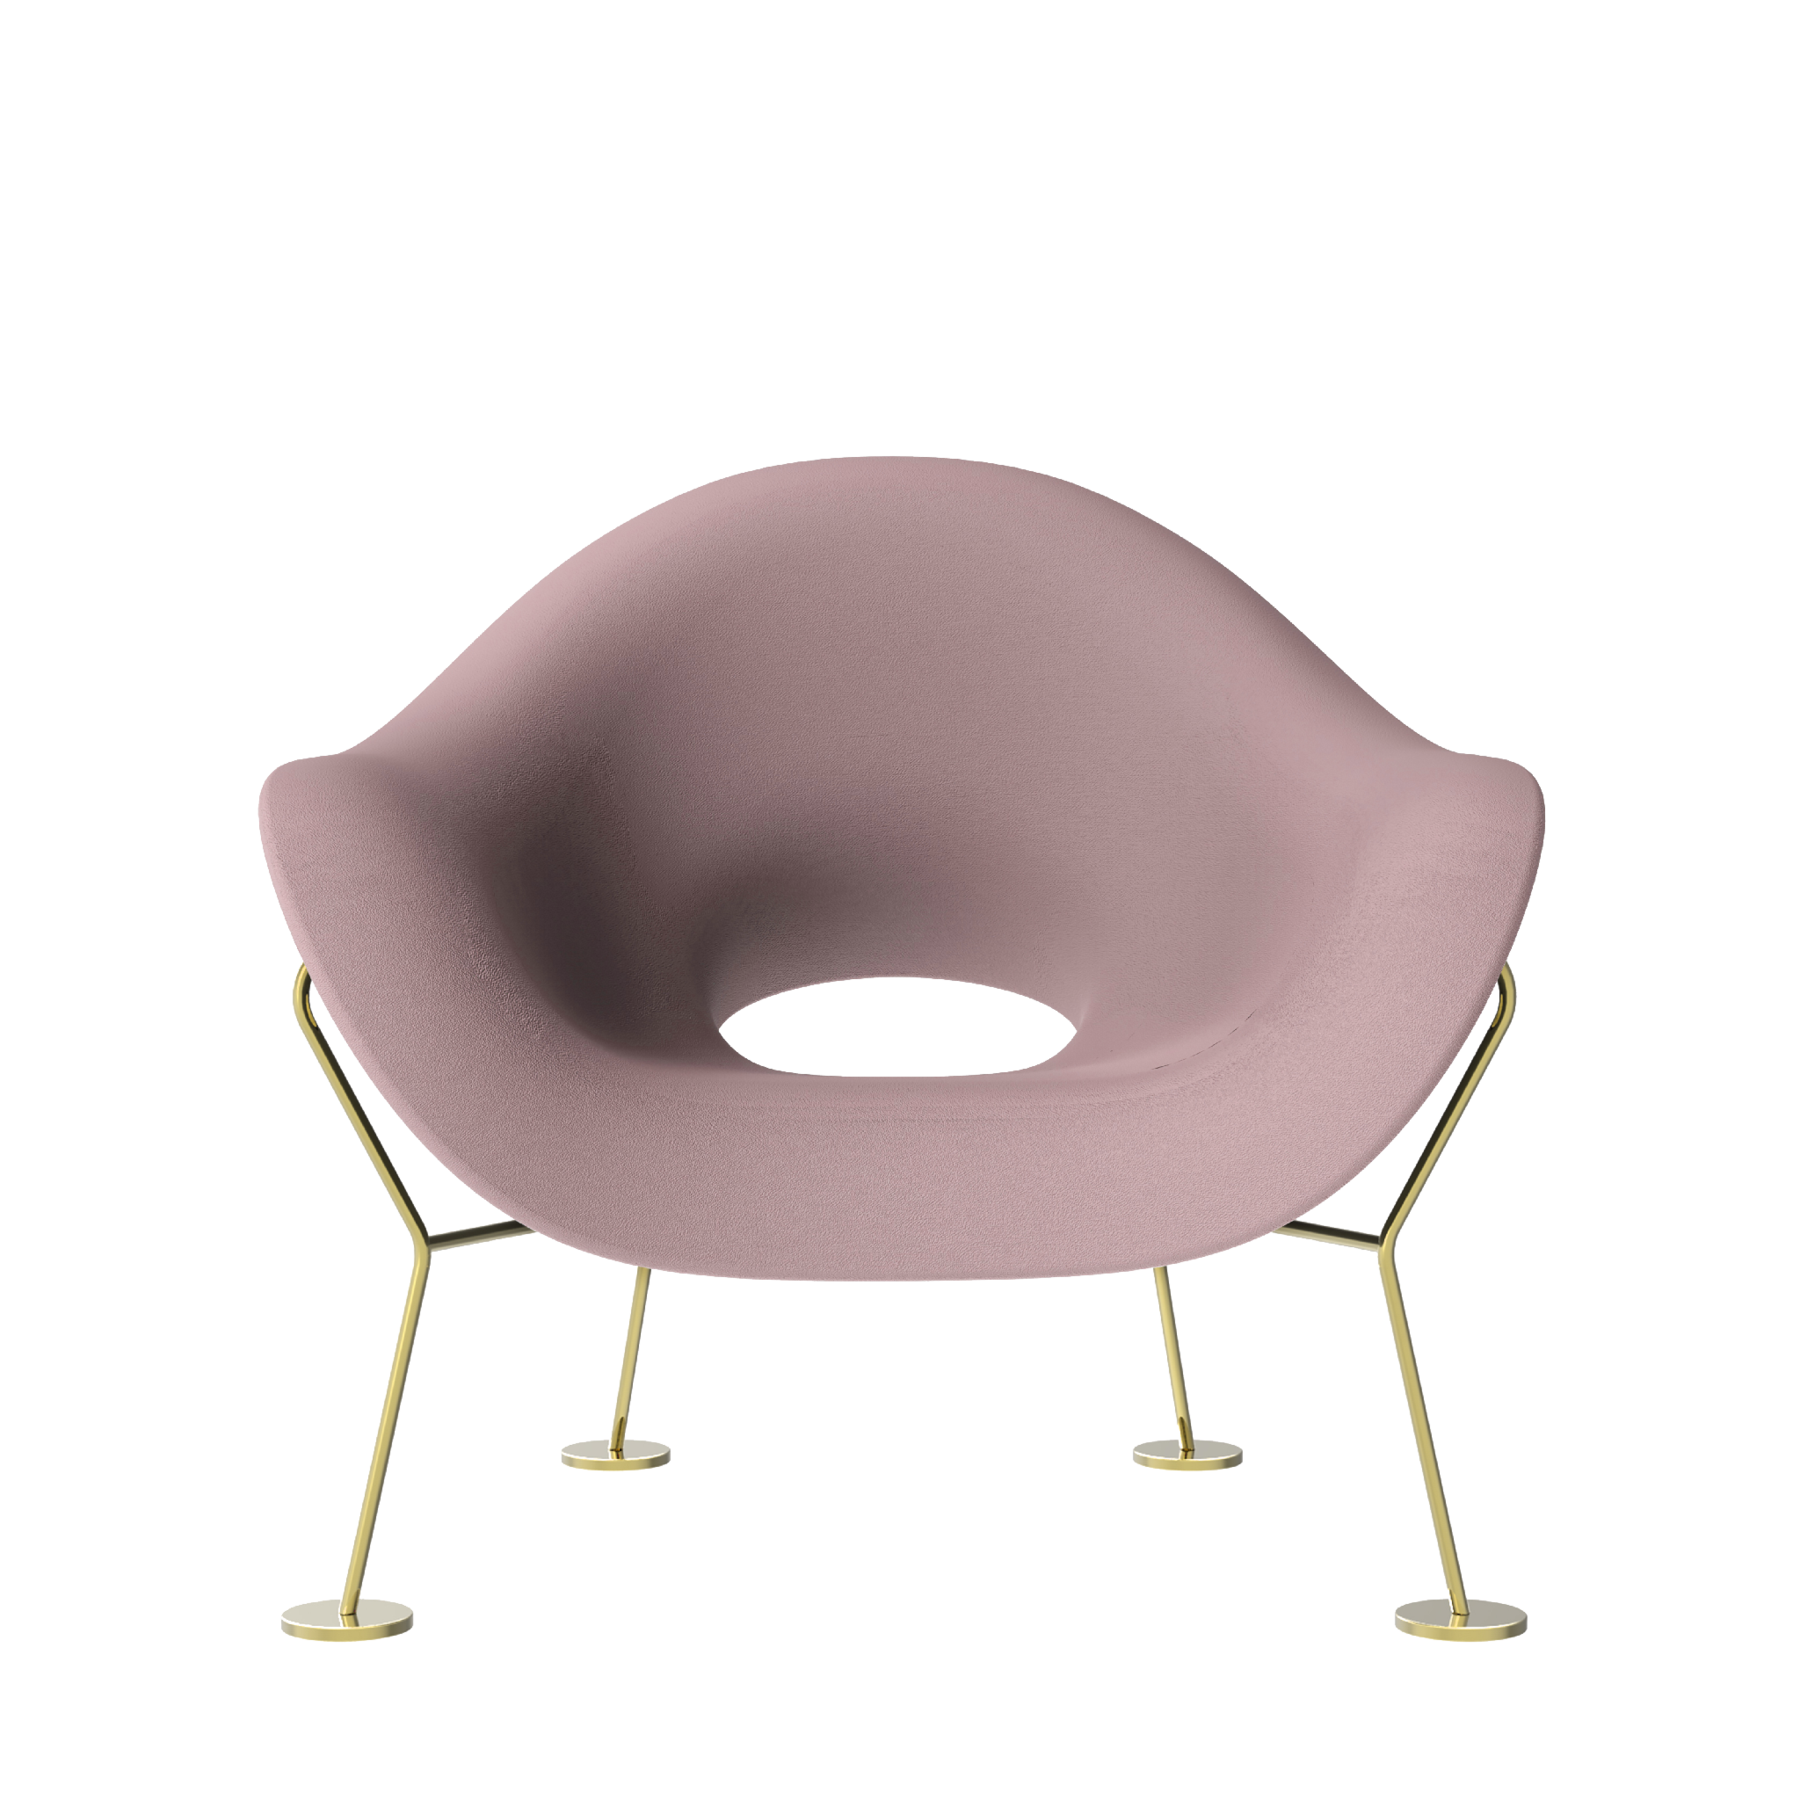 brass structure - pink seat